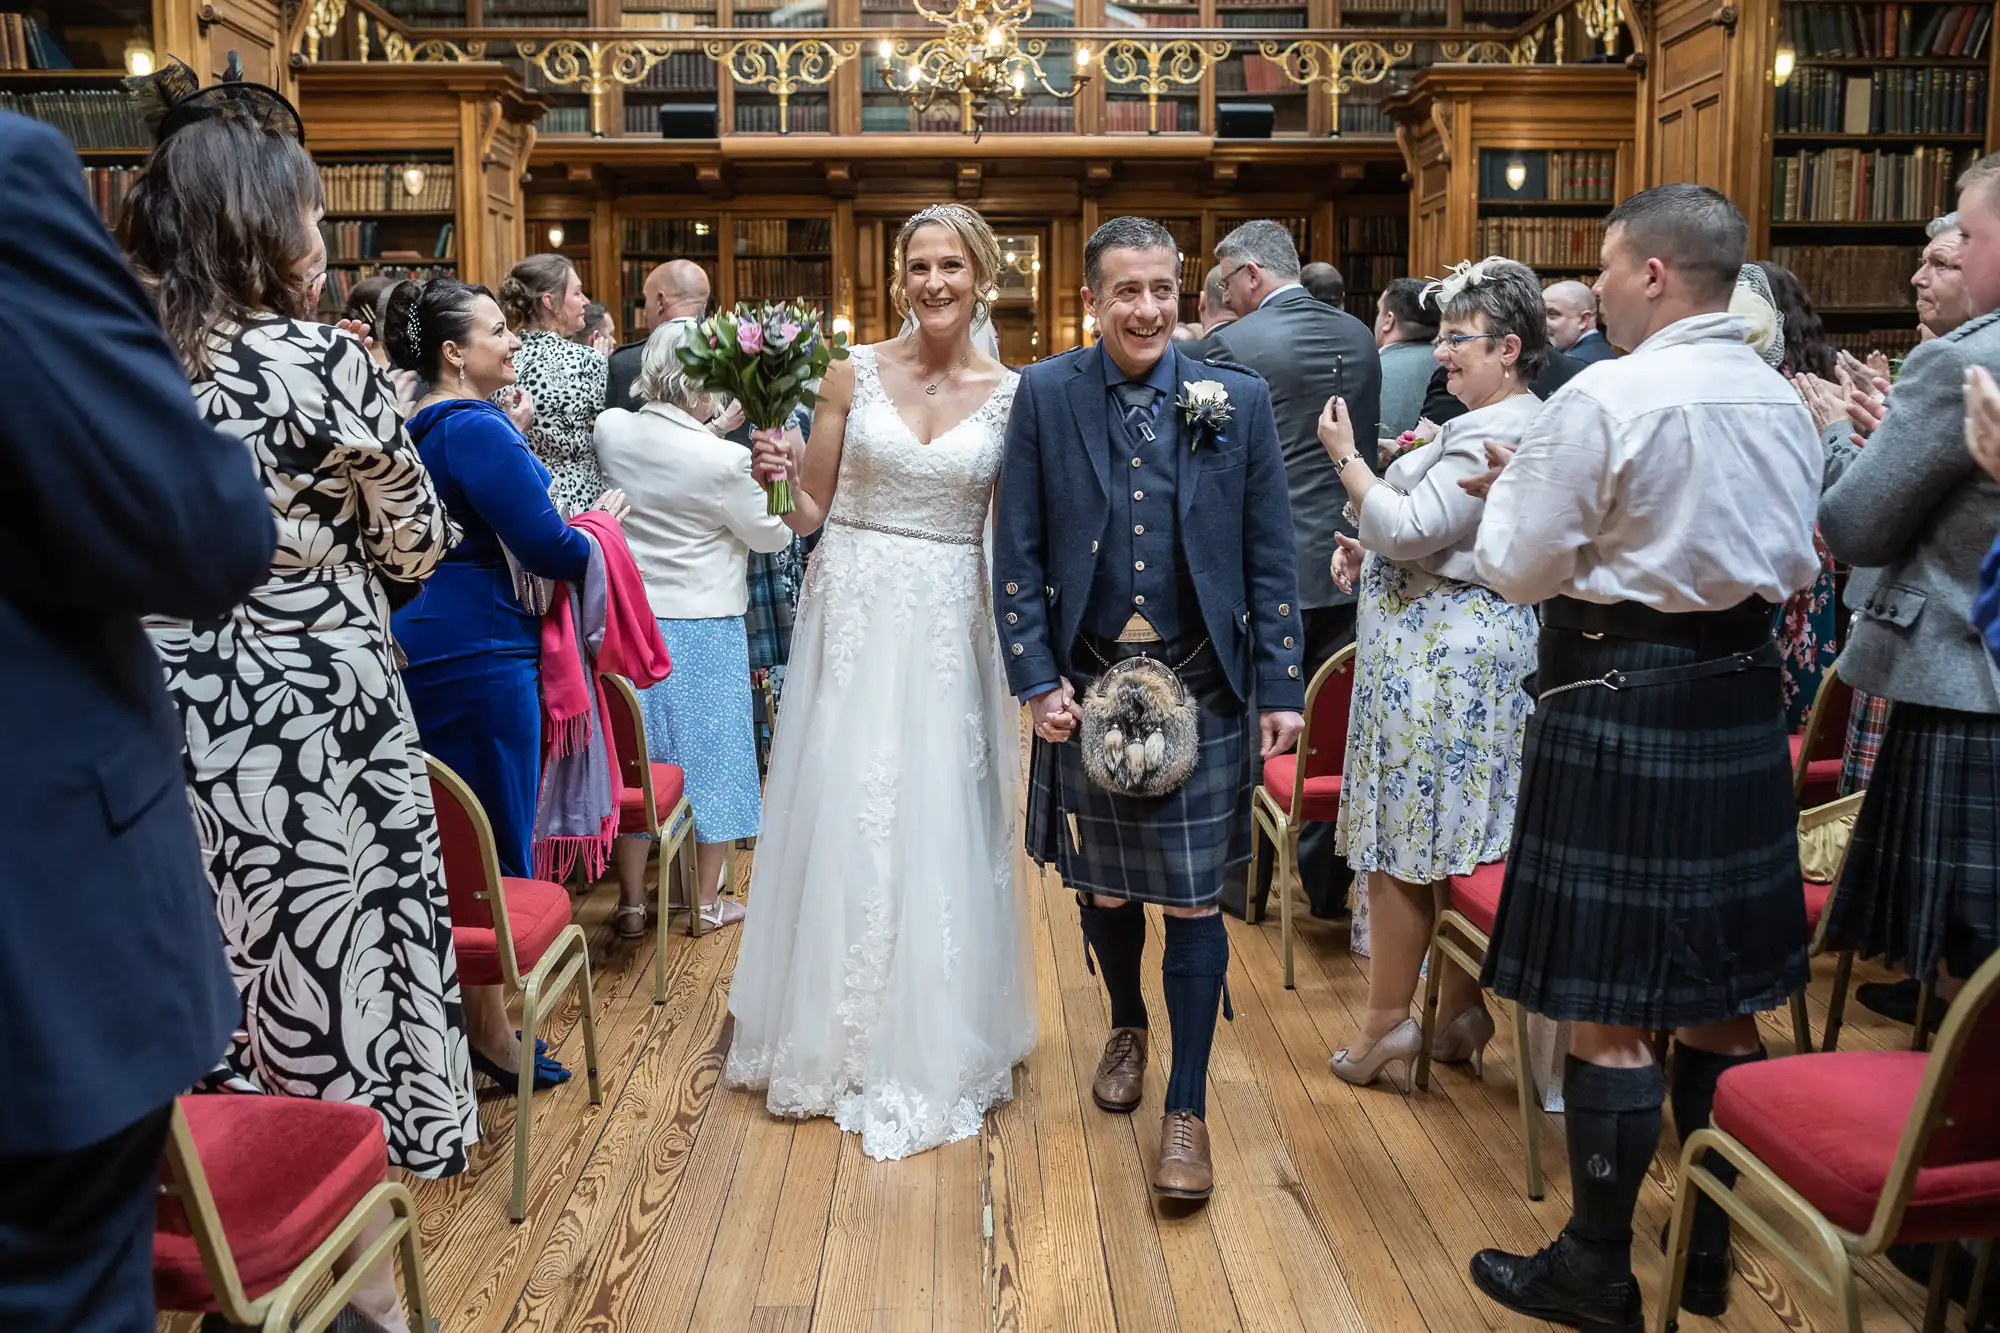 A bride in a white dress and groom in a kilt walk down the aisle, surrounded by applauding guests in a wood-paneled room with bookshelves and ornate decor.